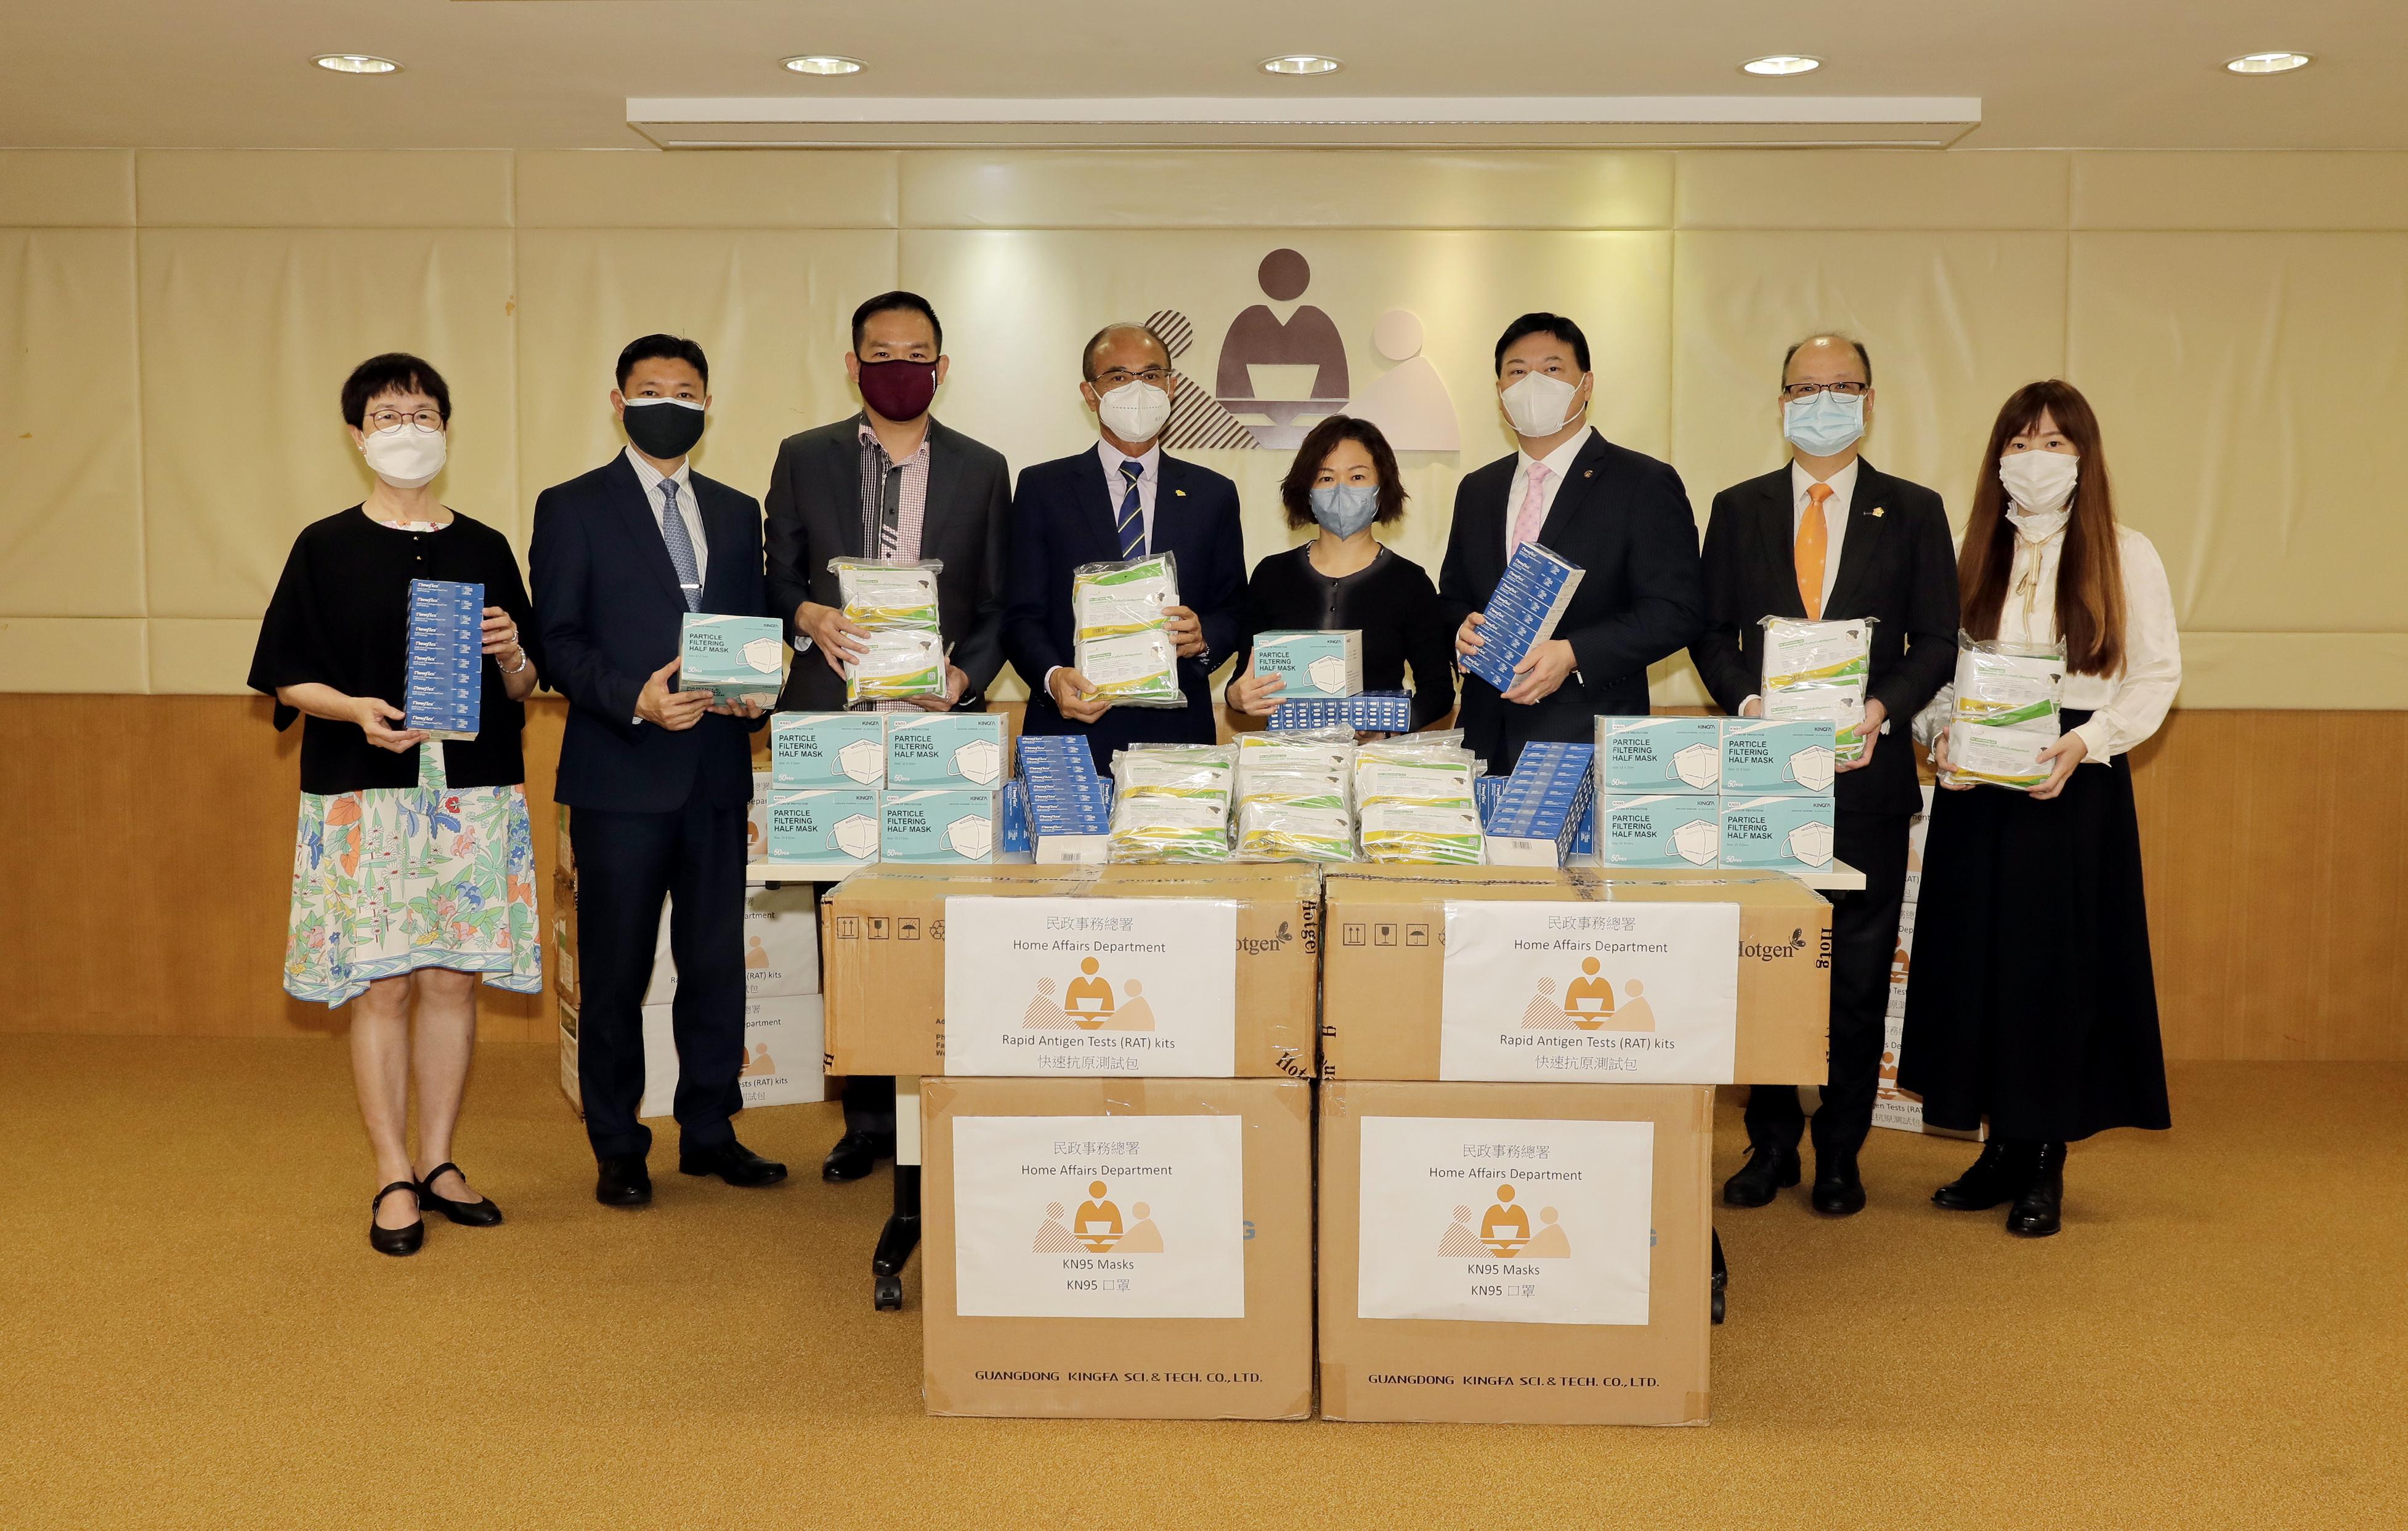 The Director of Home Affairs, Mrs Alice Cheung, today (June 23) presented rapid antigen test kits and KN95 masks to the representatives of five property management trade associations.  Photo shows Mrs Cheung (fourth from right); the President of the Hong Kong Institute of Housing, Ms Yu Chun (first left); the Chairman of the Hong Kong Property Services Alliance, Dr Mickey Yan (third left); the Chairperson of the Hong Kong Association of Property Services Agents, Mr Stephen Poon (fourth from left); the President of the Hong Kong Association of Property Management Companies, Dr Edmond Cheng (third right); the President of the Federation of Hong Kong Property Management Industry Limited, Mr Davis Wong (second right); and other guests at the presentation ceremony.